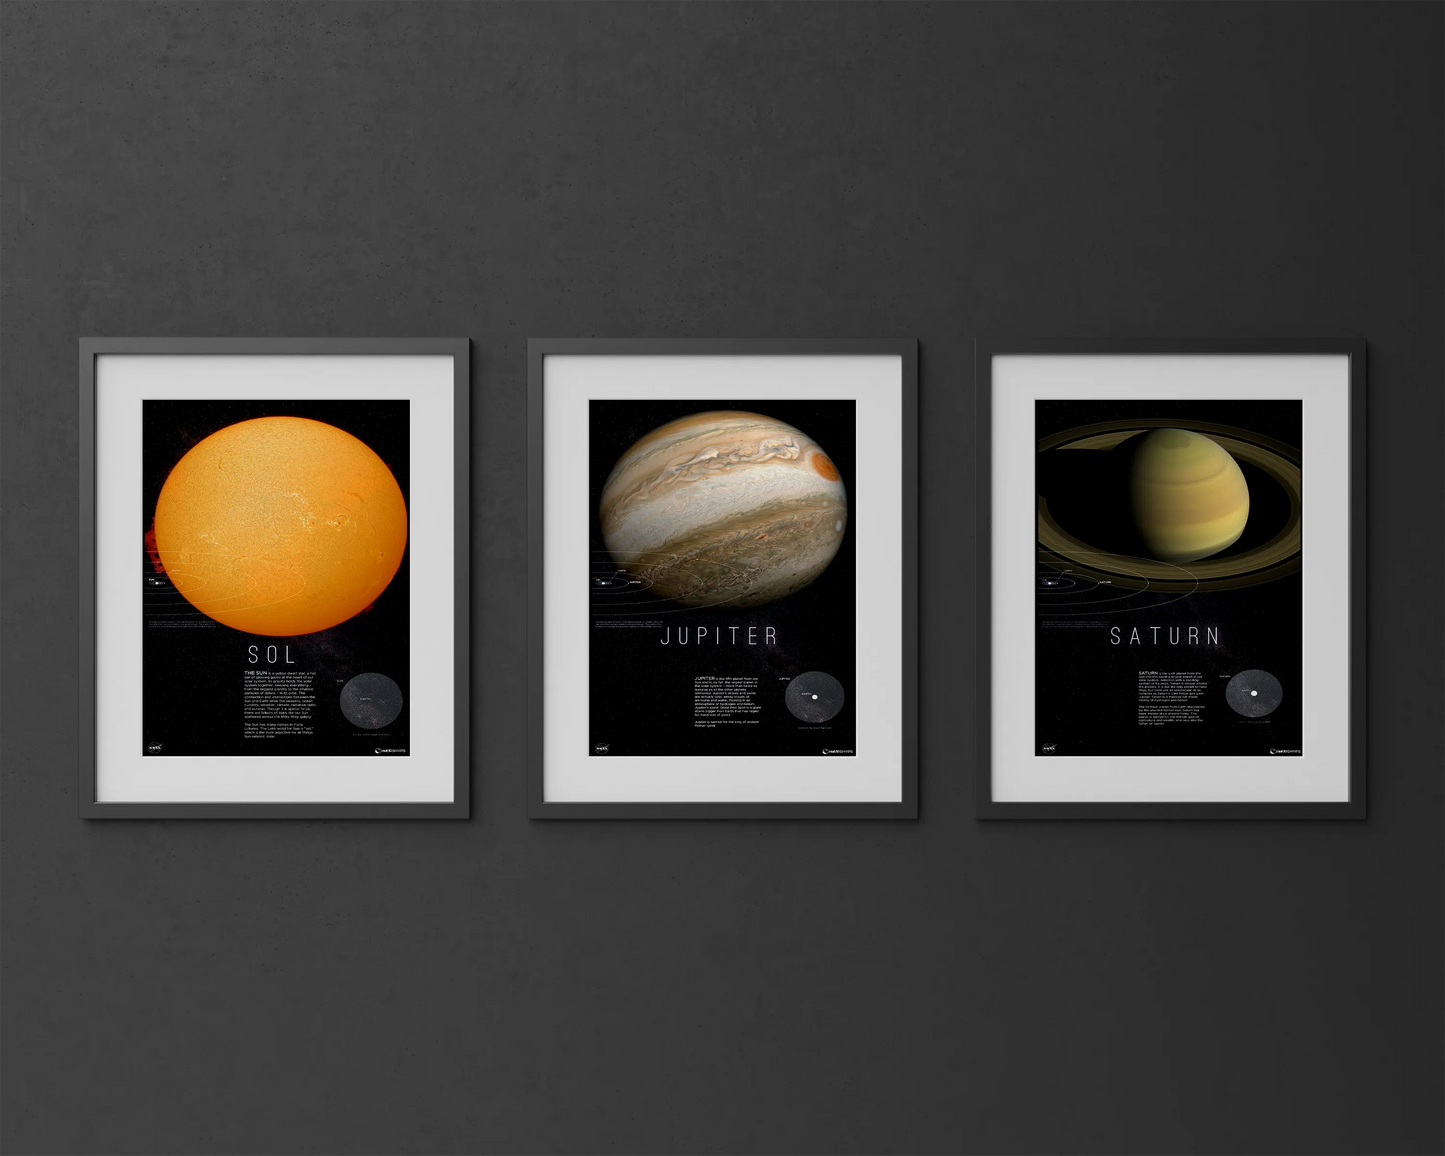 Jupiter Jovian Splendor Print | Jupiter Decor|Rocket Blueprint Posters | The image displays three framed posters on a dark background, each featuring an image and description of the Sun, Jupiter, and Saturn, with their names prominently labeled below the images.